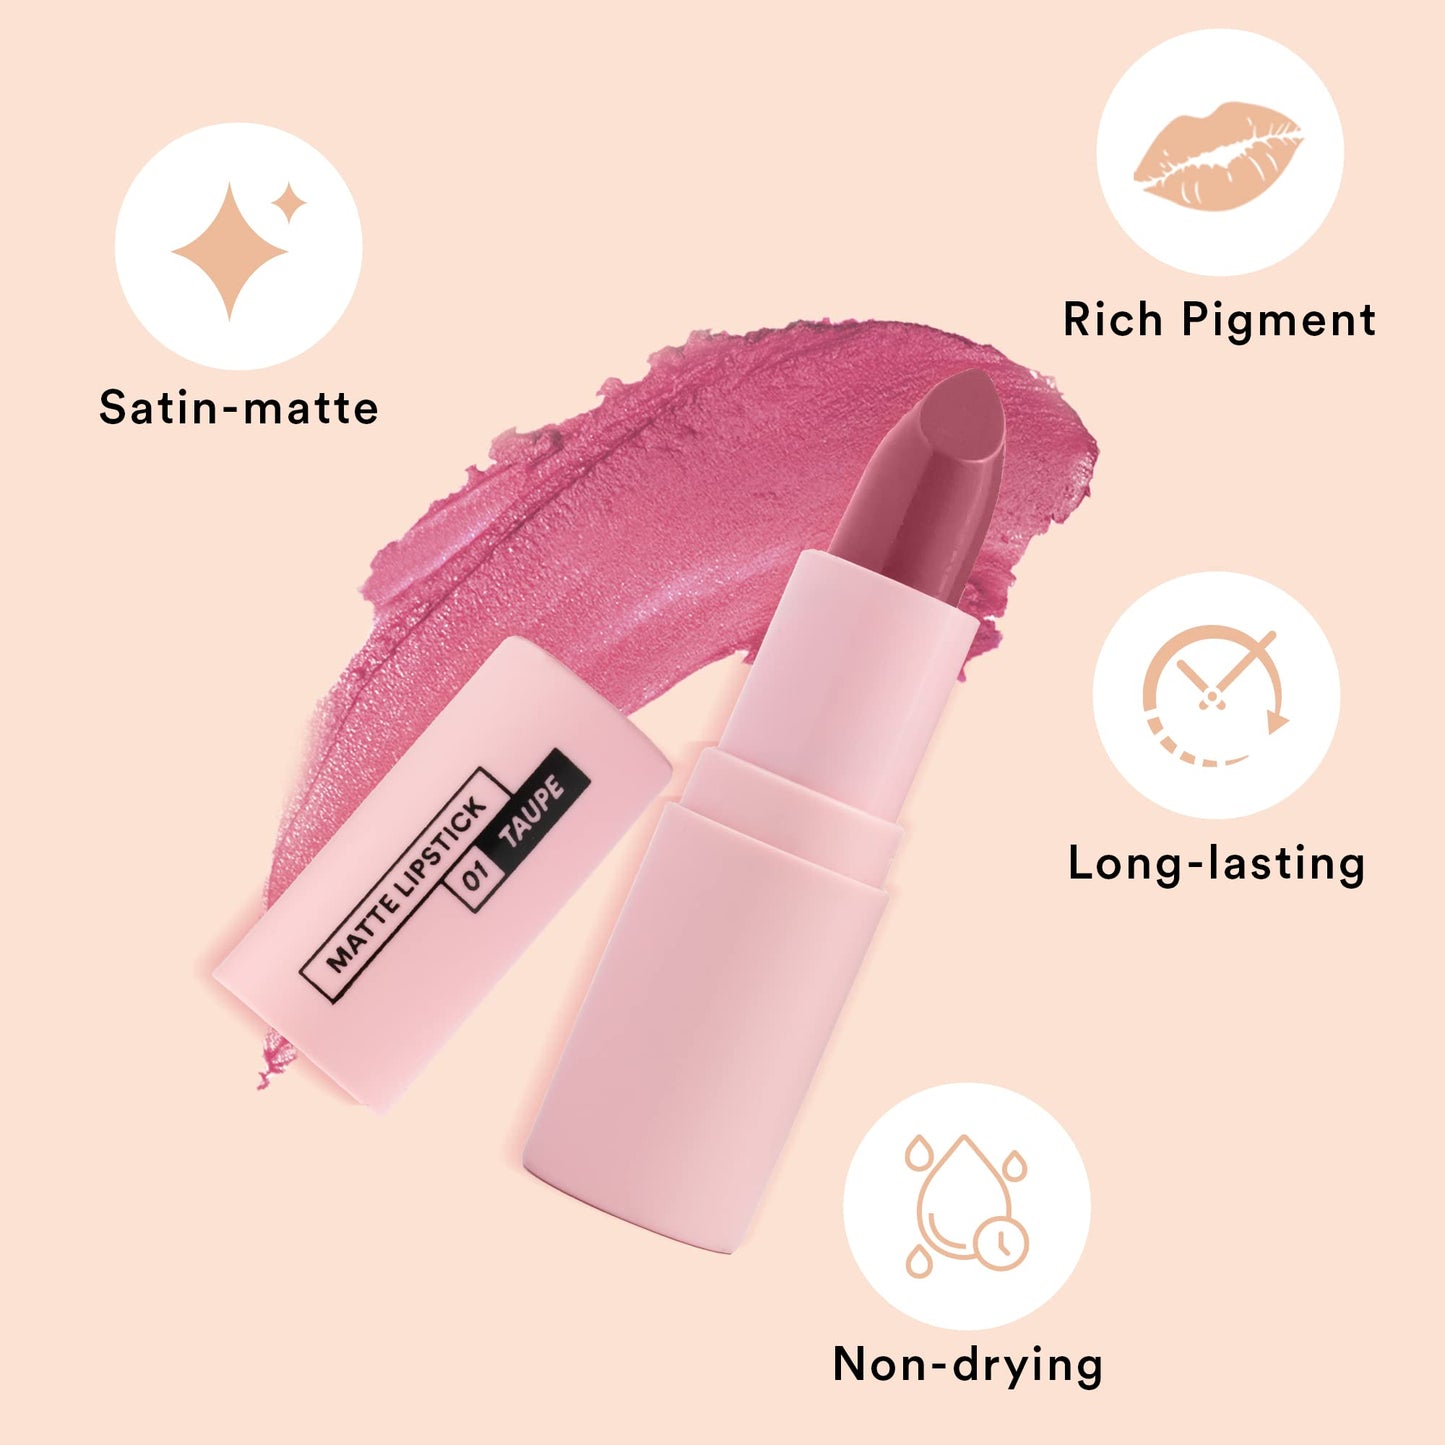 SUGAR POP 3 in 1 Lip Kit Combo, Richly pigmented, Long-lasting, Ultra Matte, Smudge-Proof, Hydrating, UV Protection, Moisturizing Rich Pigment, 02 Mauve, 01 Taupe & Cherry